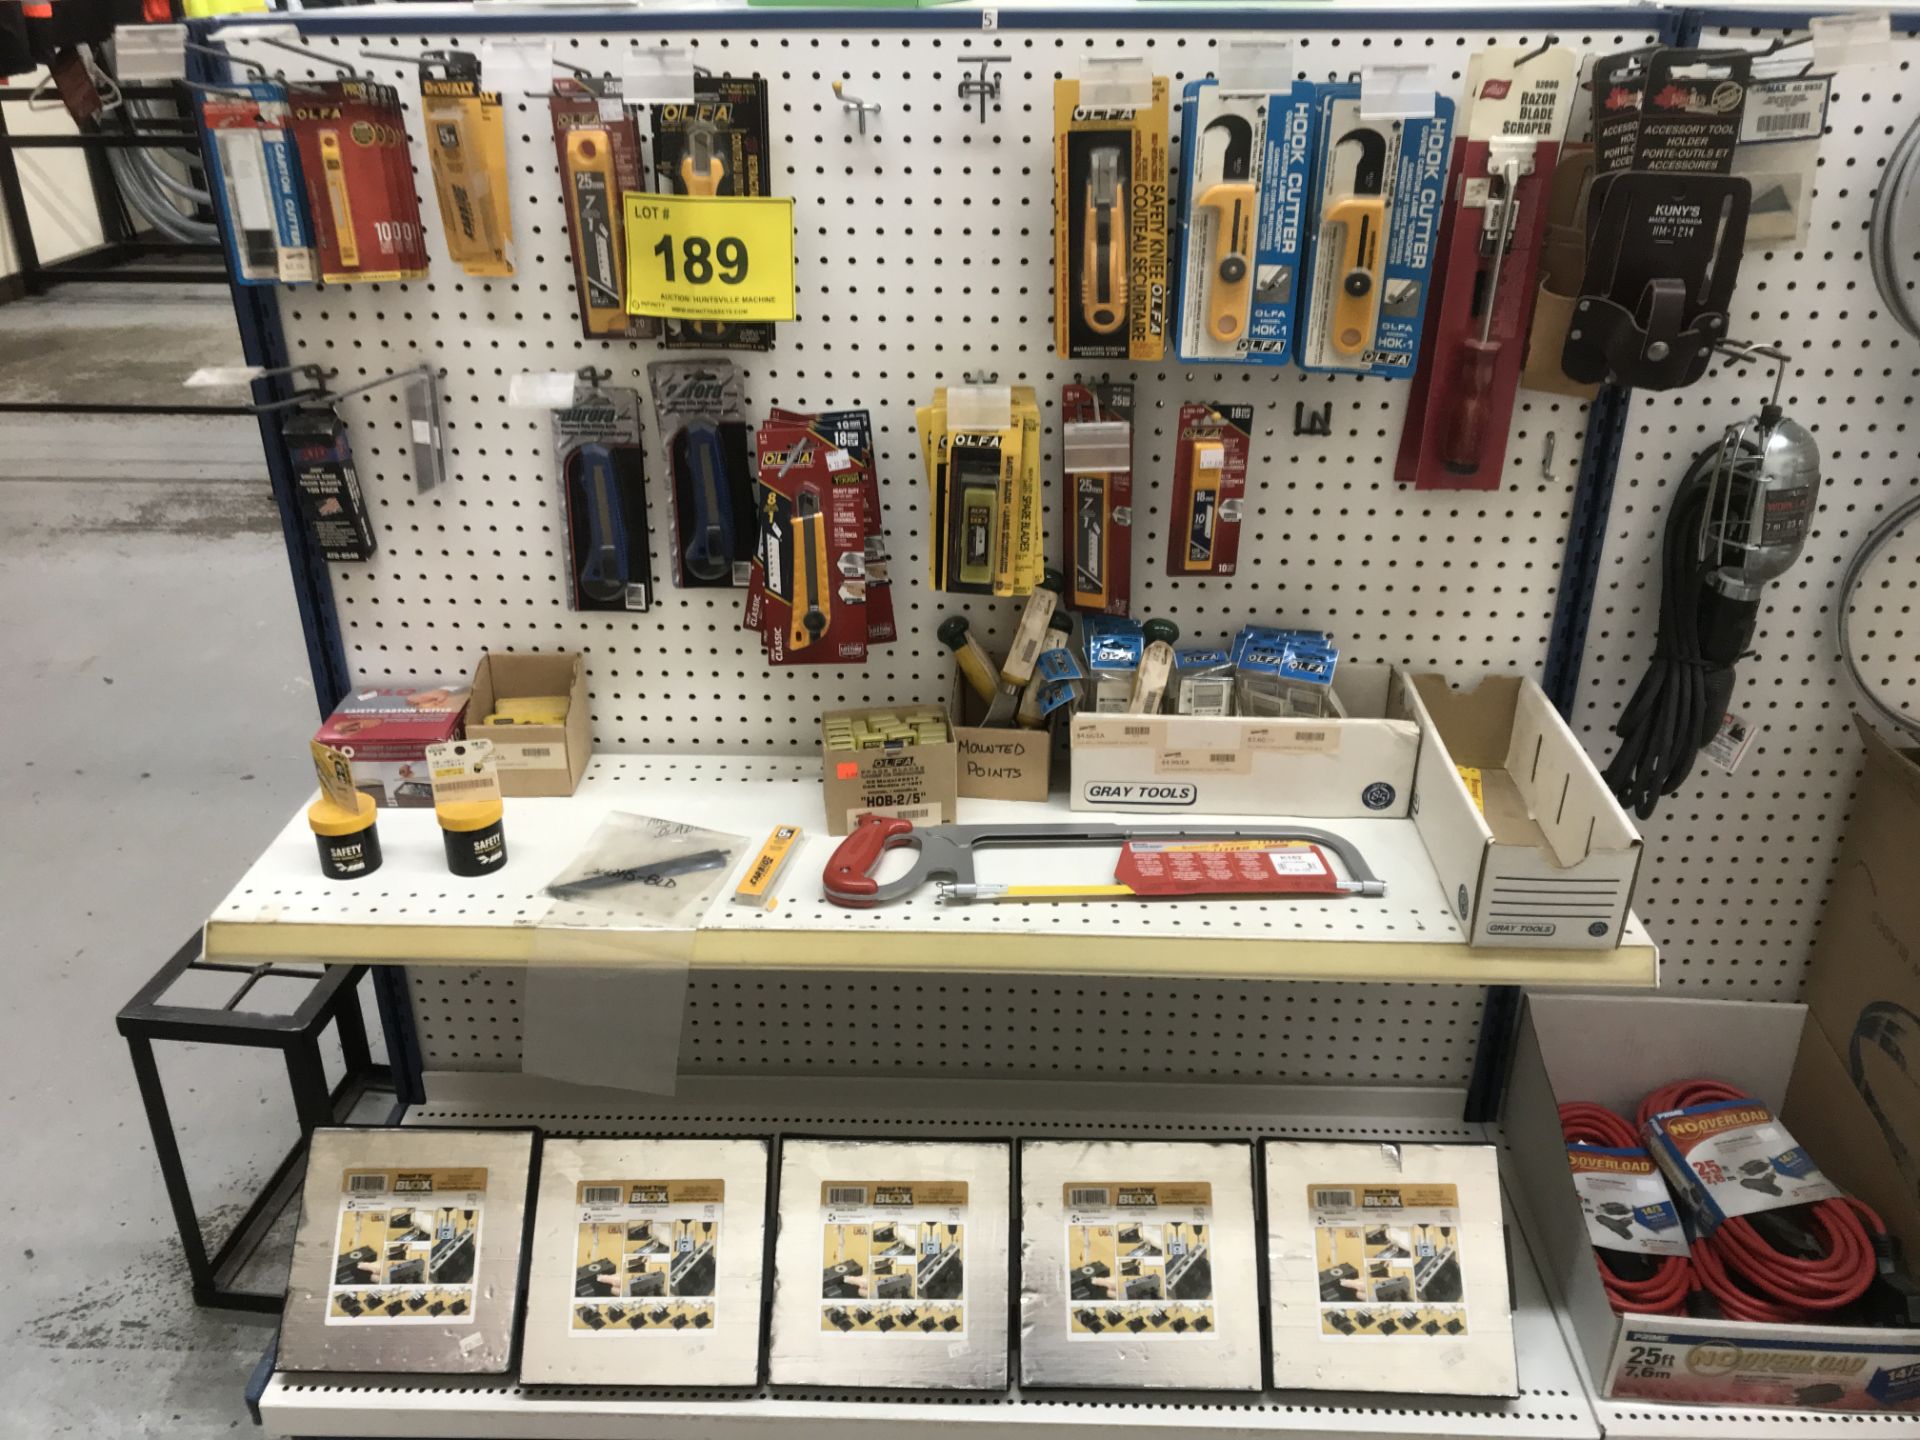 CONTENTS OF (1) SECTION PEG BOARD DISPLAY INCLUDING KNIVES, ROOF TOP BLOX, BLADES, ETC. (NO